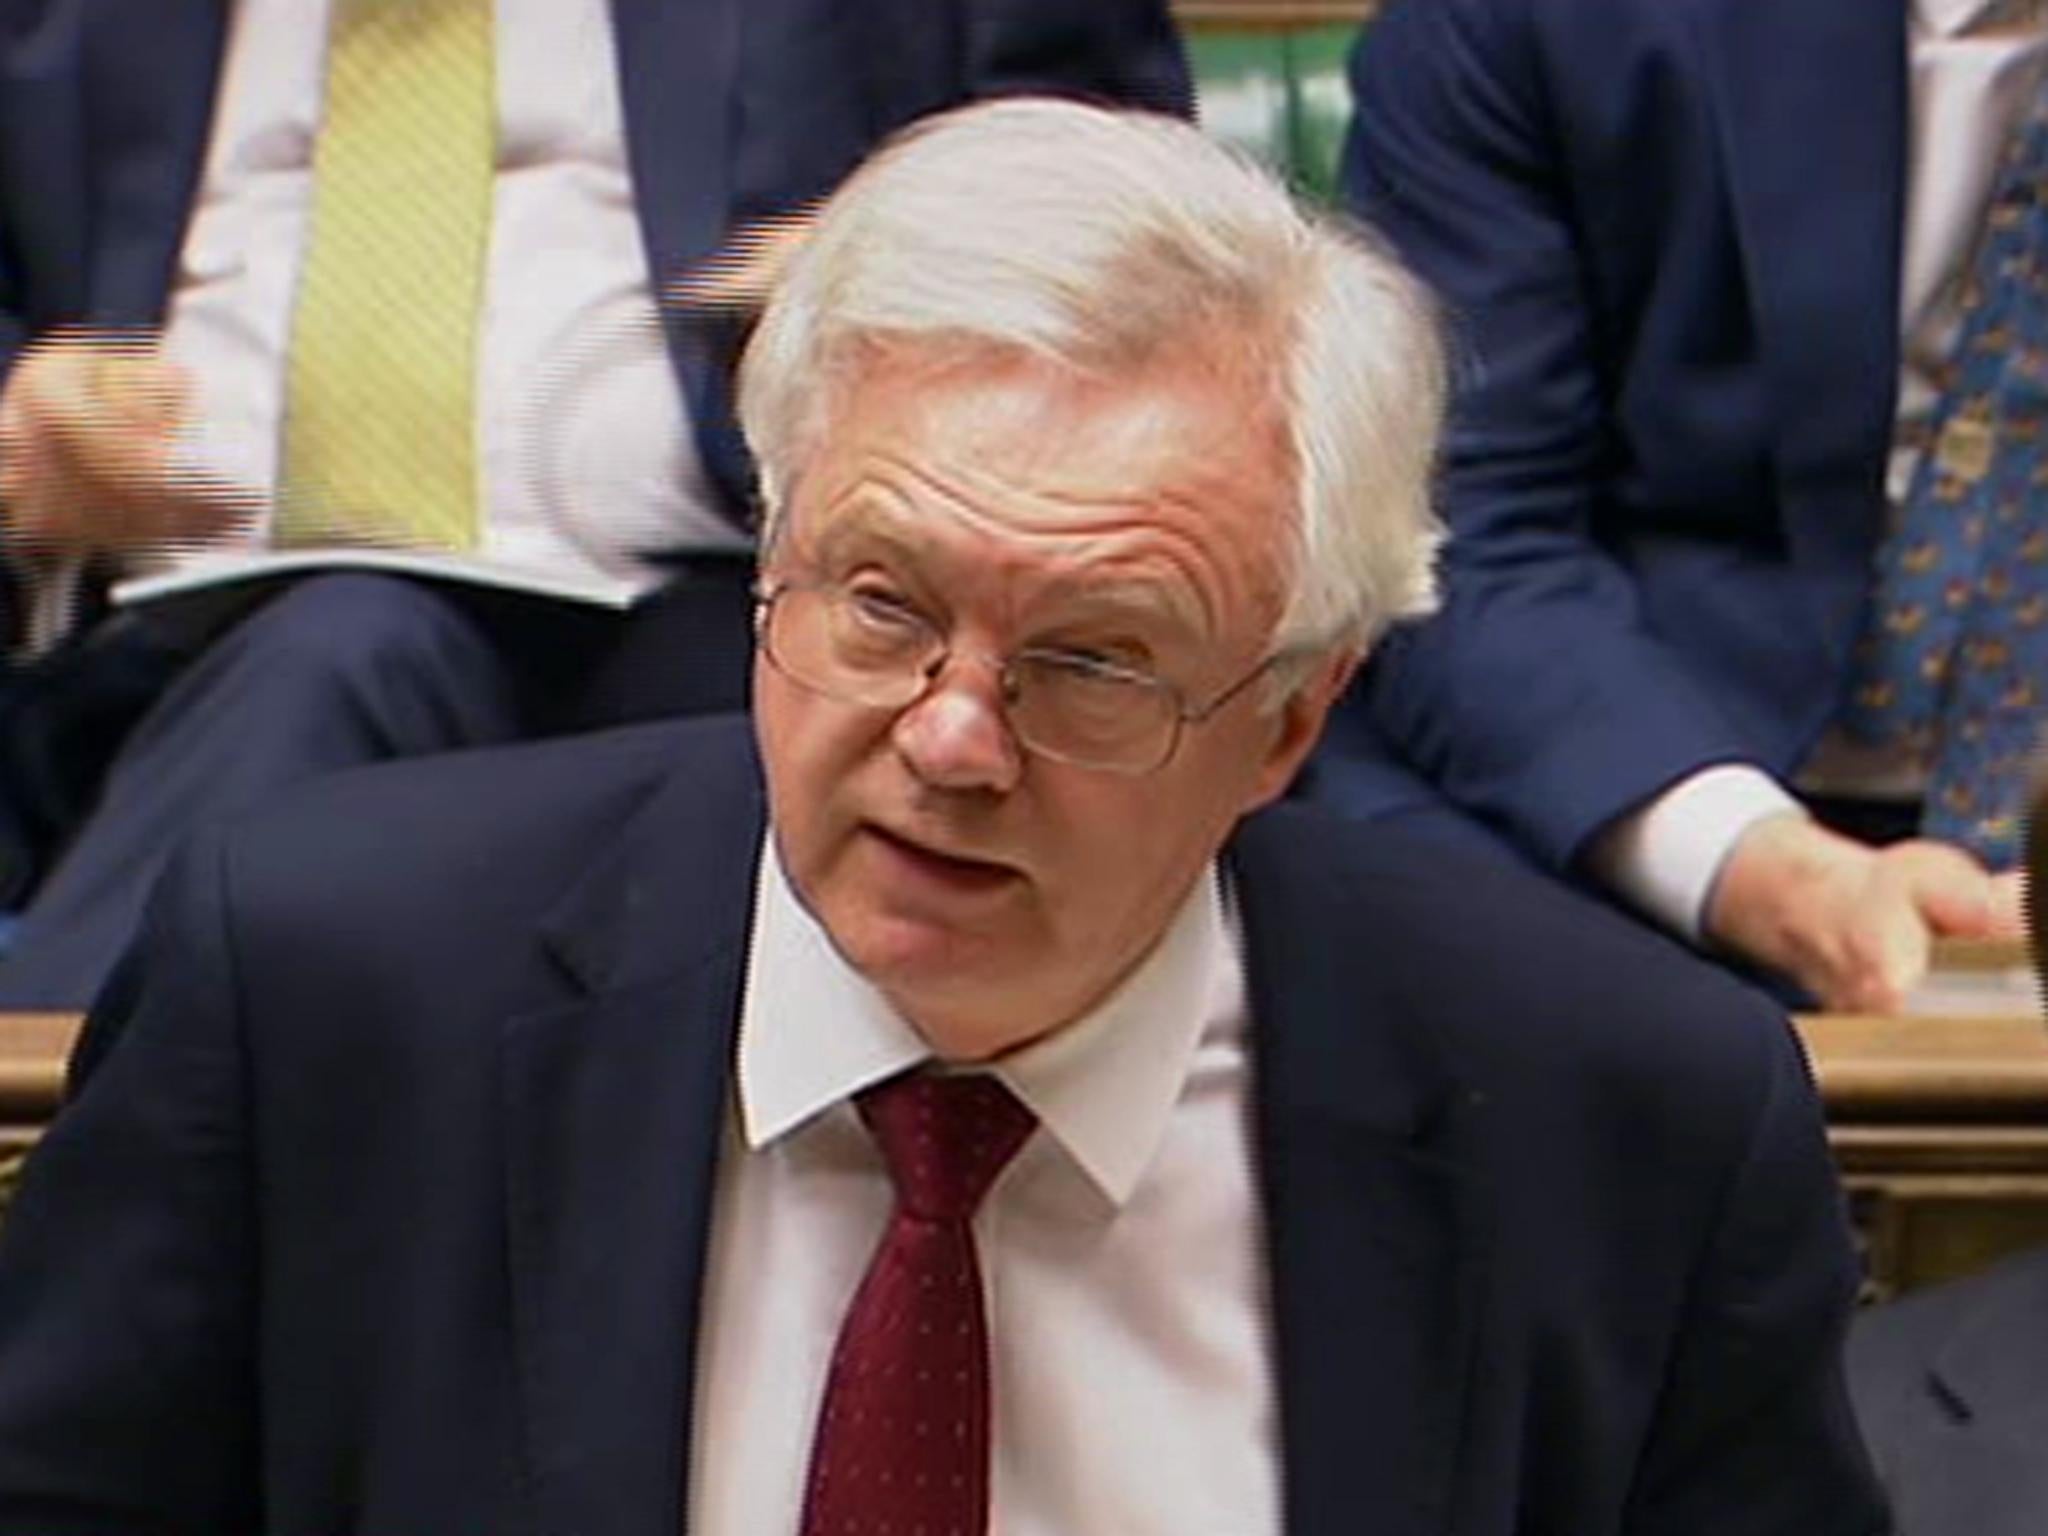 David Davis speaks in House of Commons about the Brexit white paper